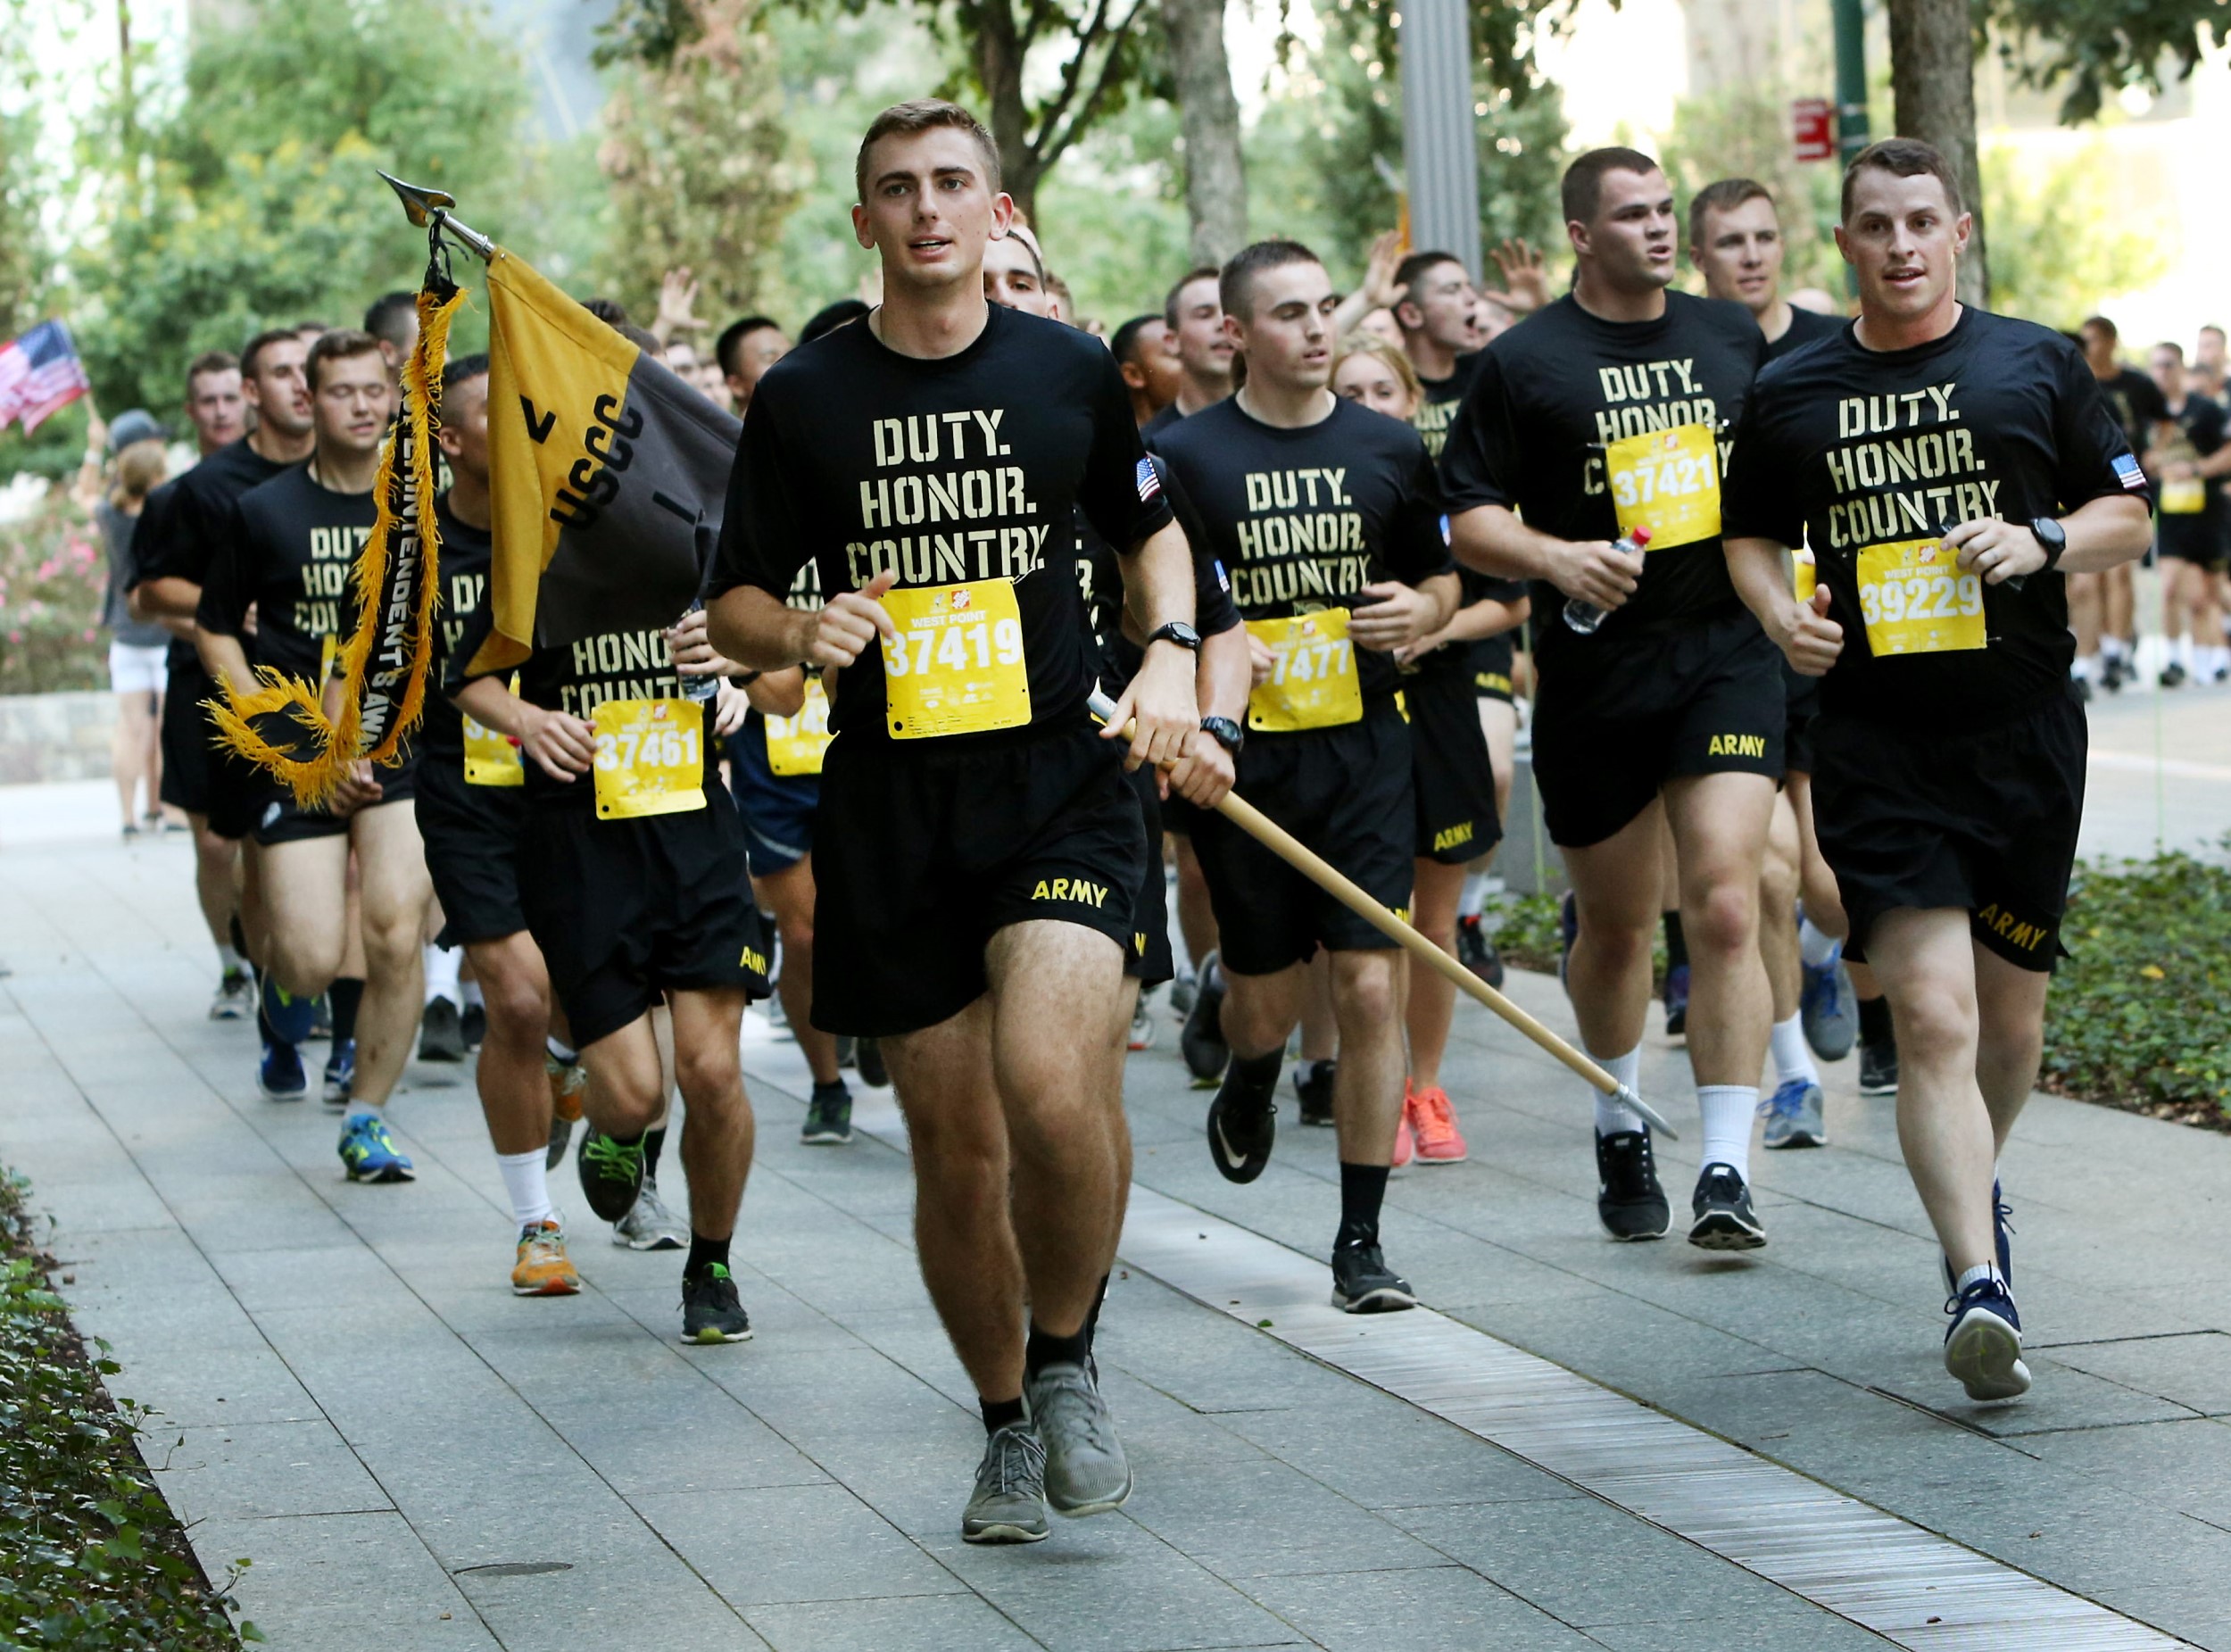 Dozens of West Point cadets in running outfits take part in the Tunnel to Towers 5K Run and Walk.